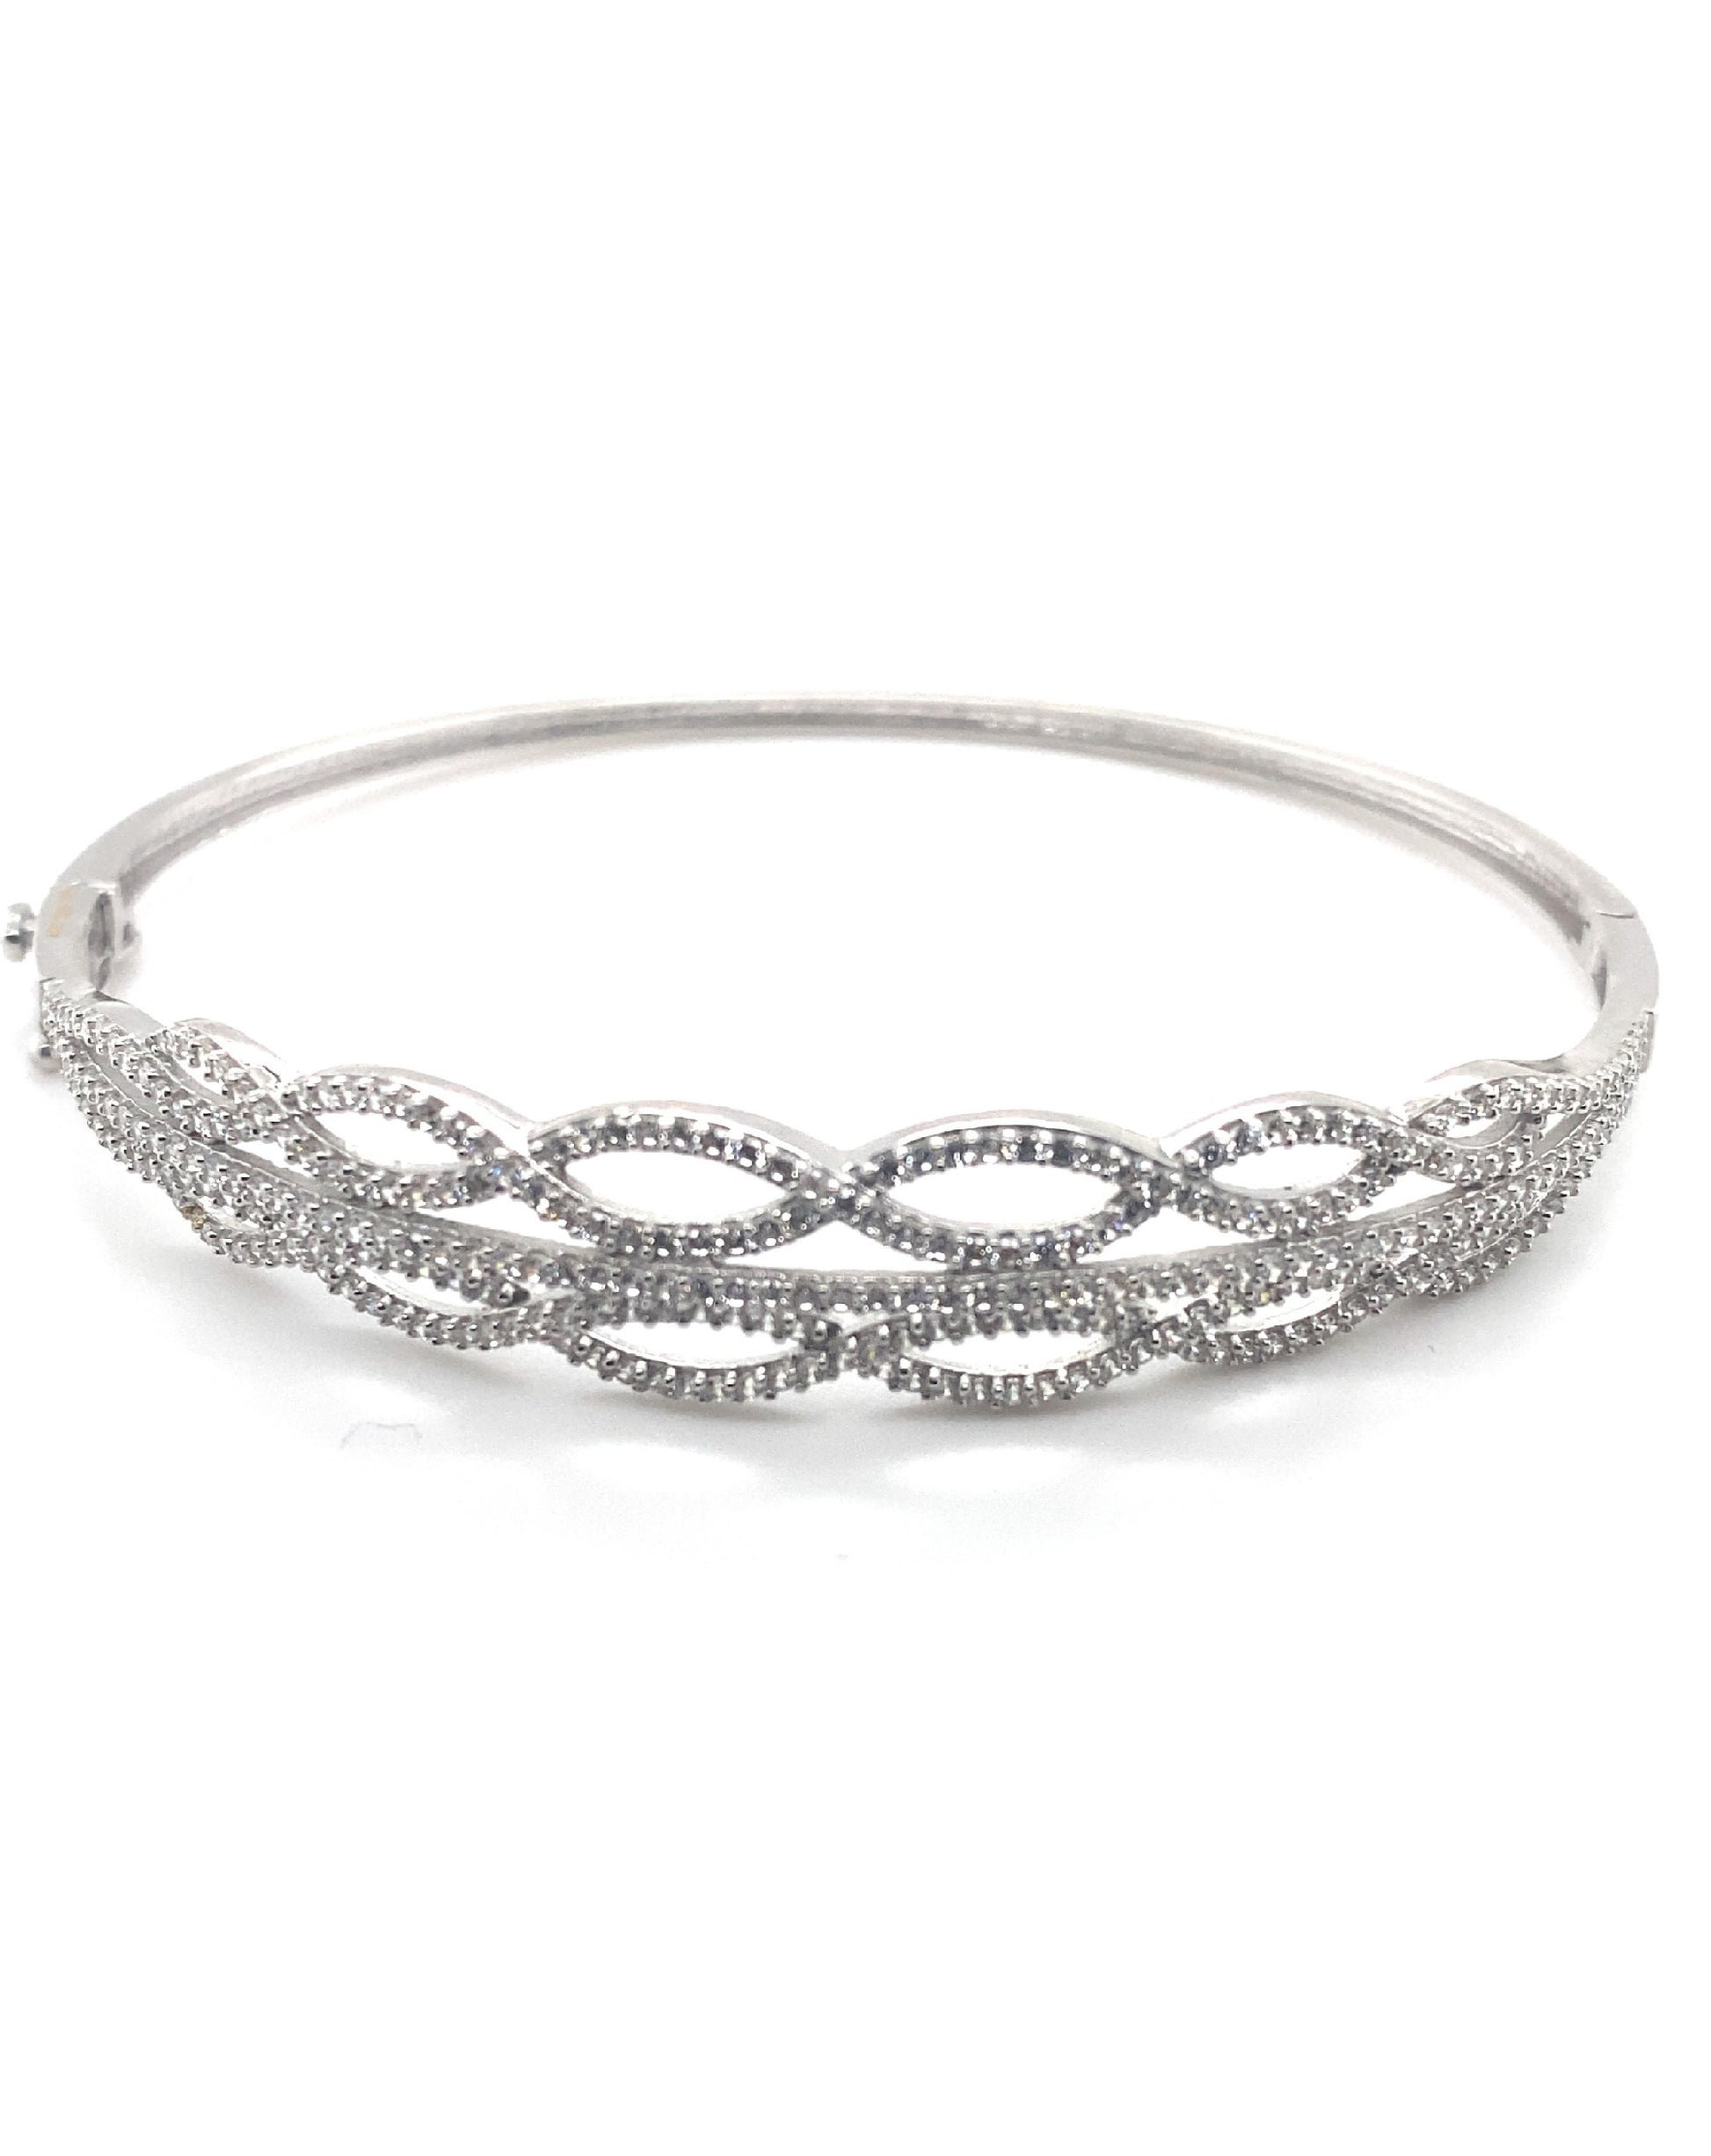 Gold Infinity Bangle 18 Kt White gold with White Sapphires Bracelets